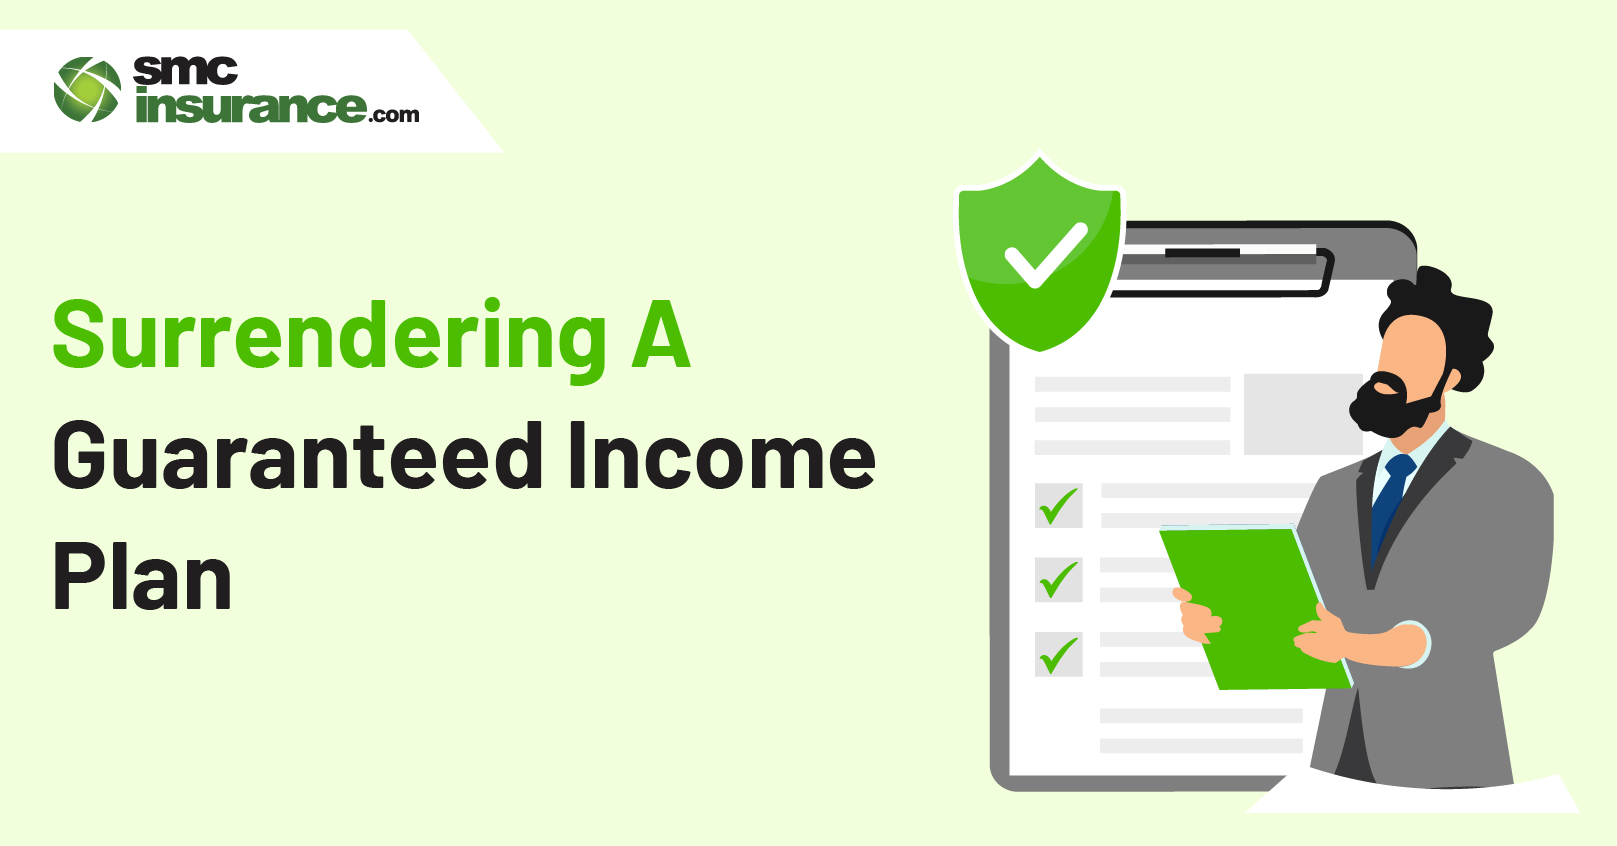 Surrendering A Guaranteed Income Plan